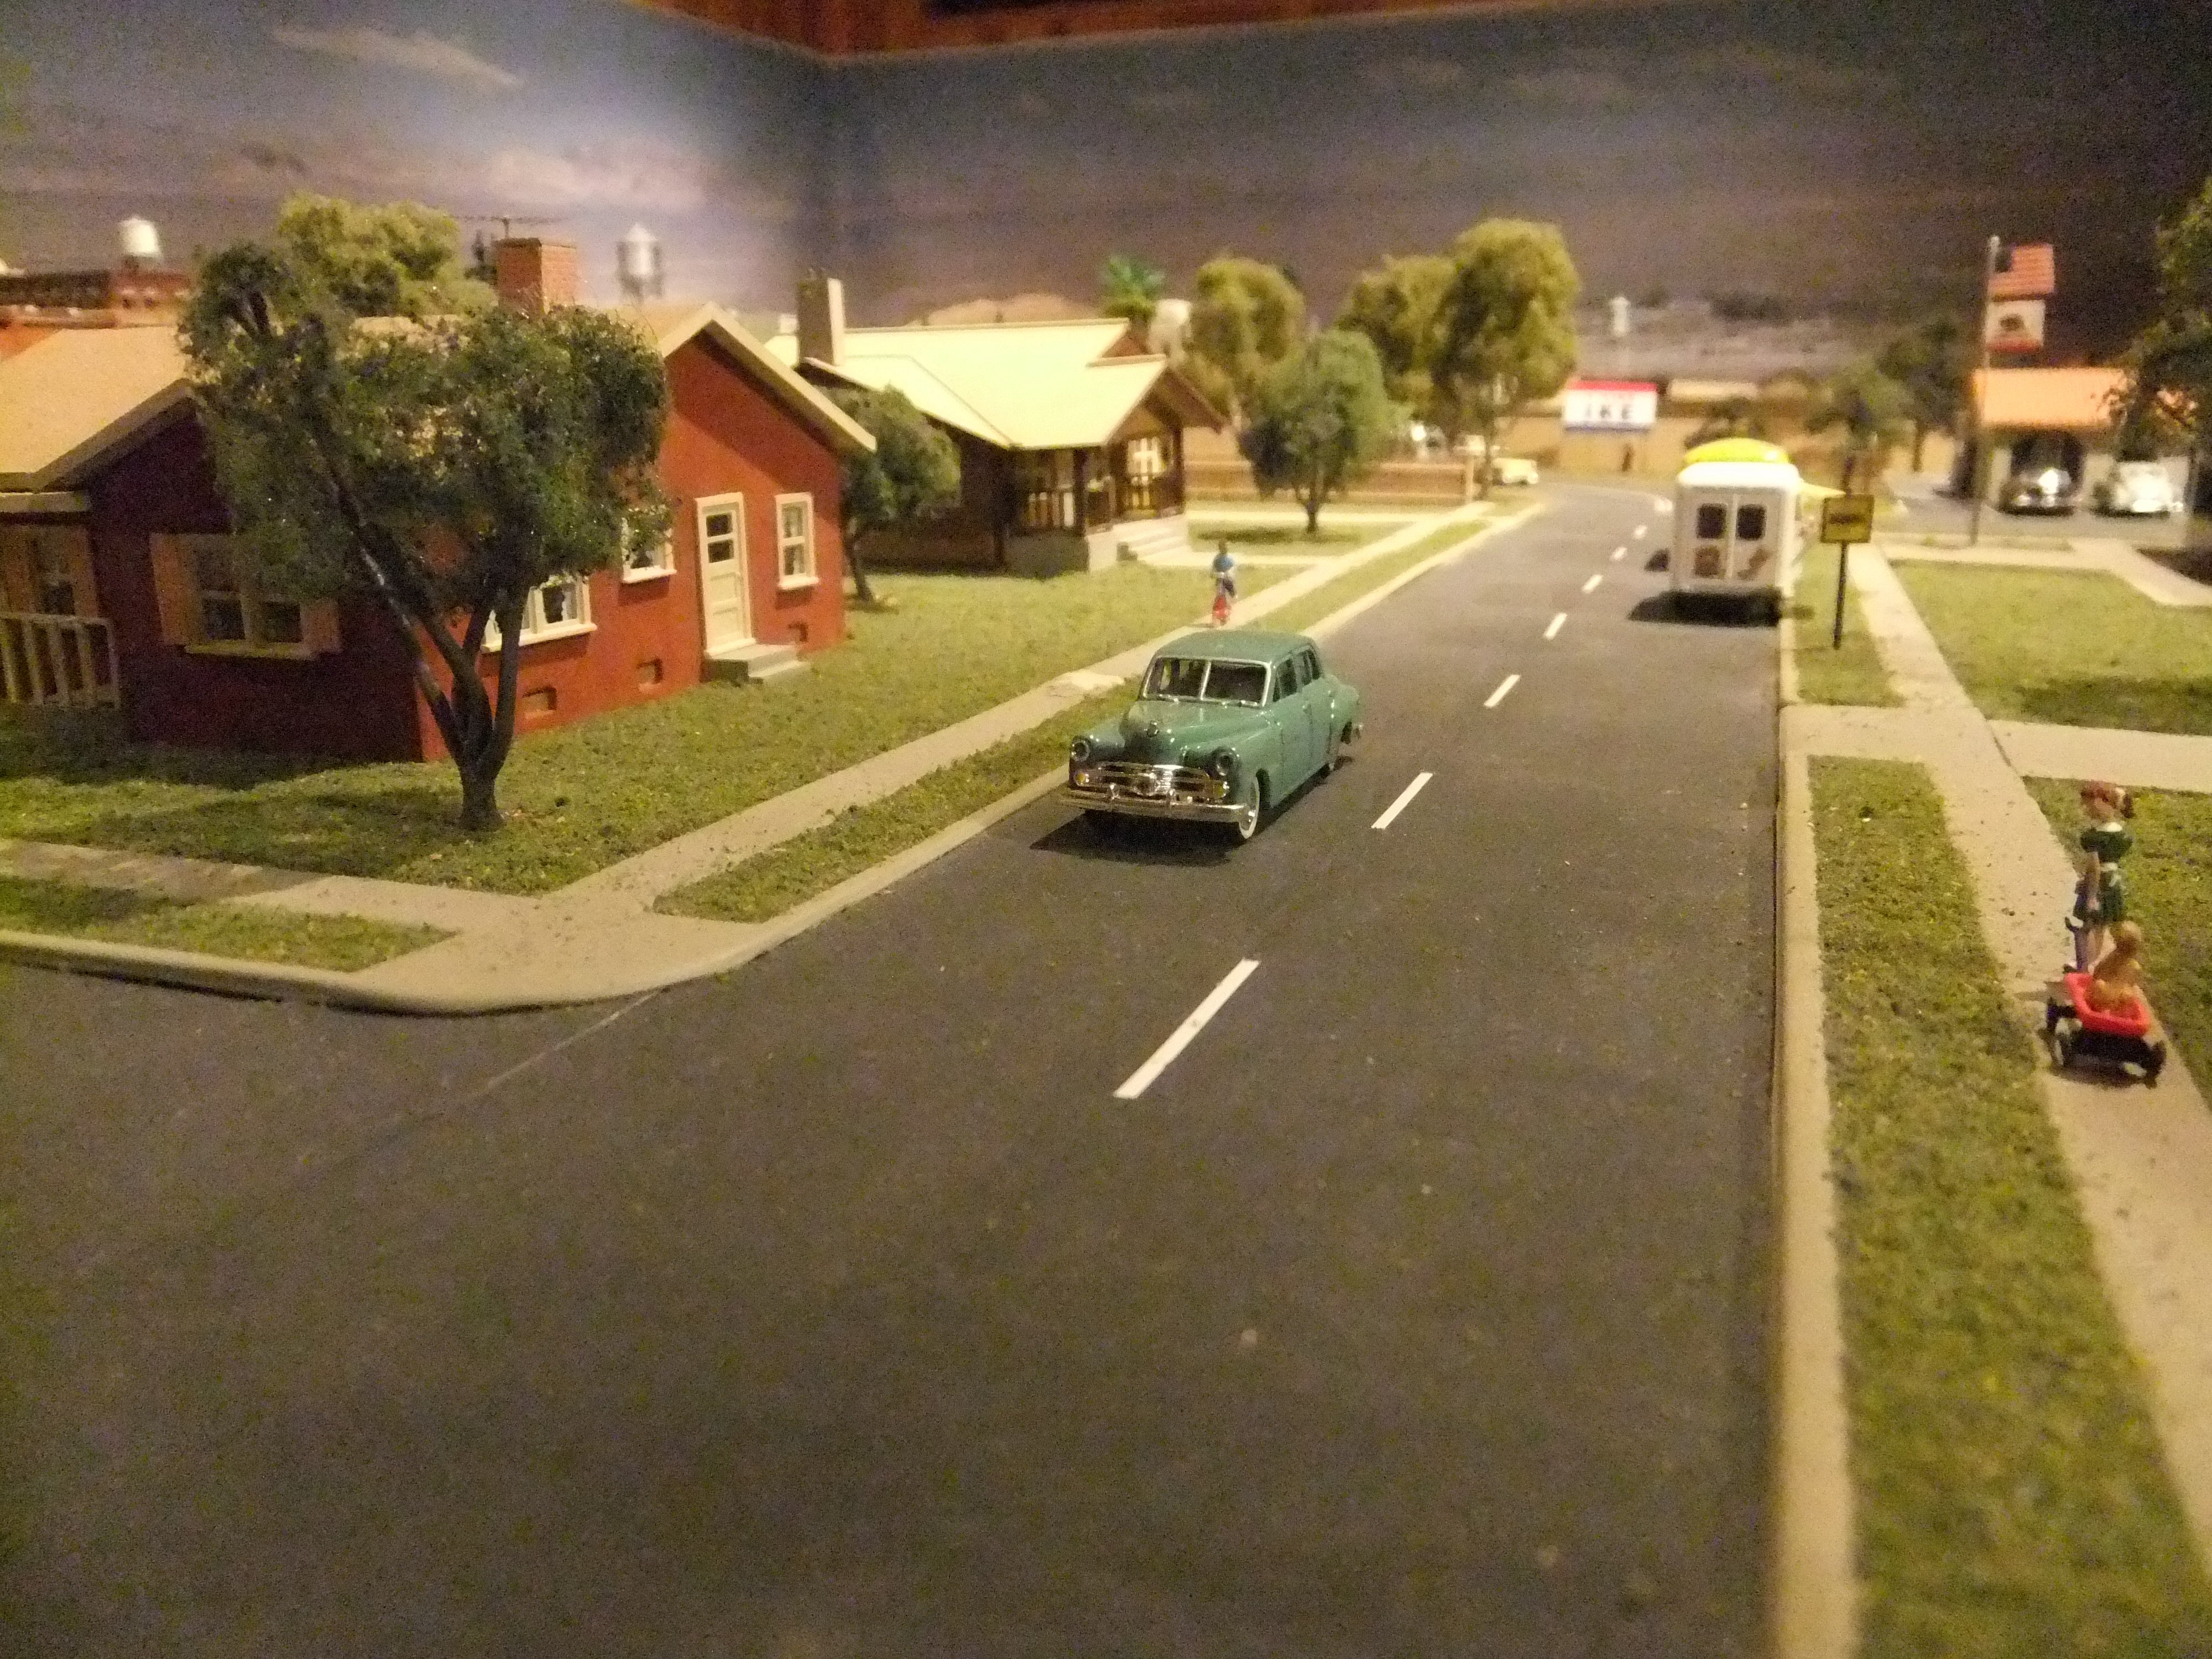 HIGHWAY STREET WHITE ANGLED RIGHT PARKING LOT LINES 1/48 O SCALE TRAIN LAYOUT 